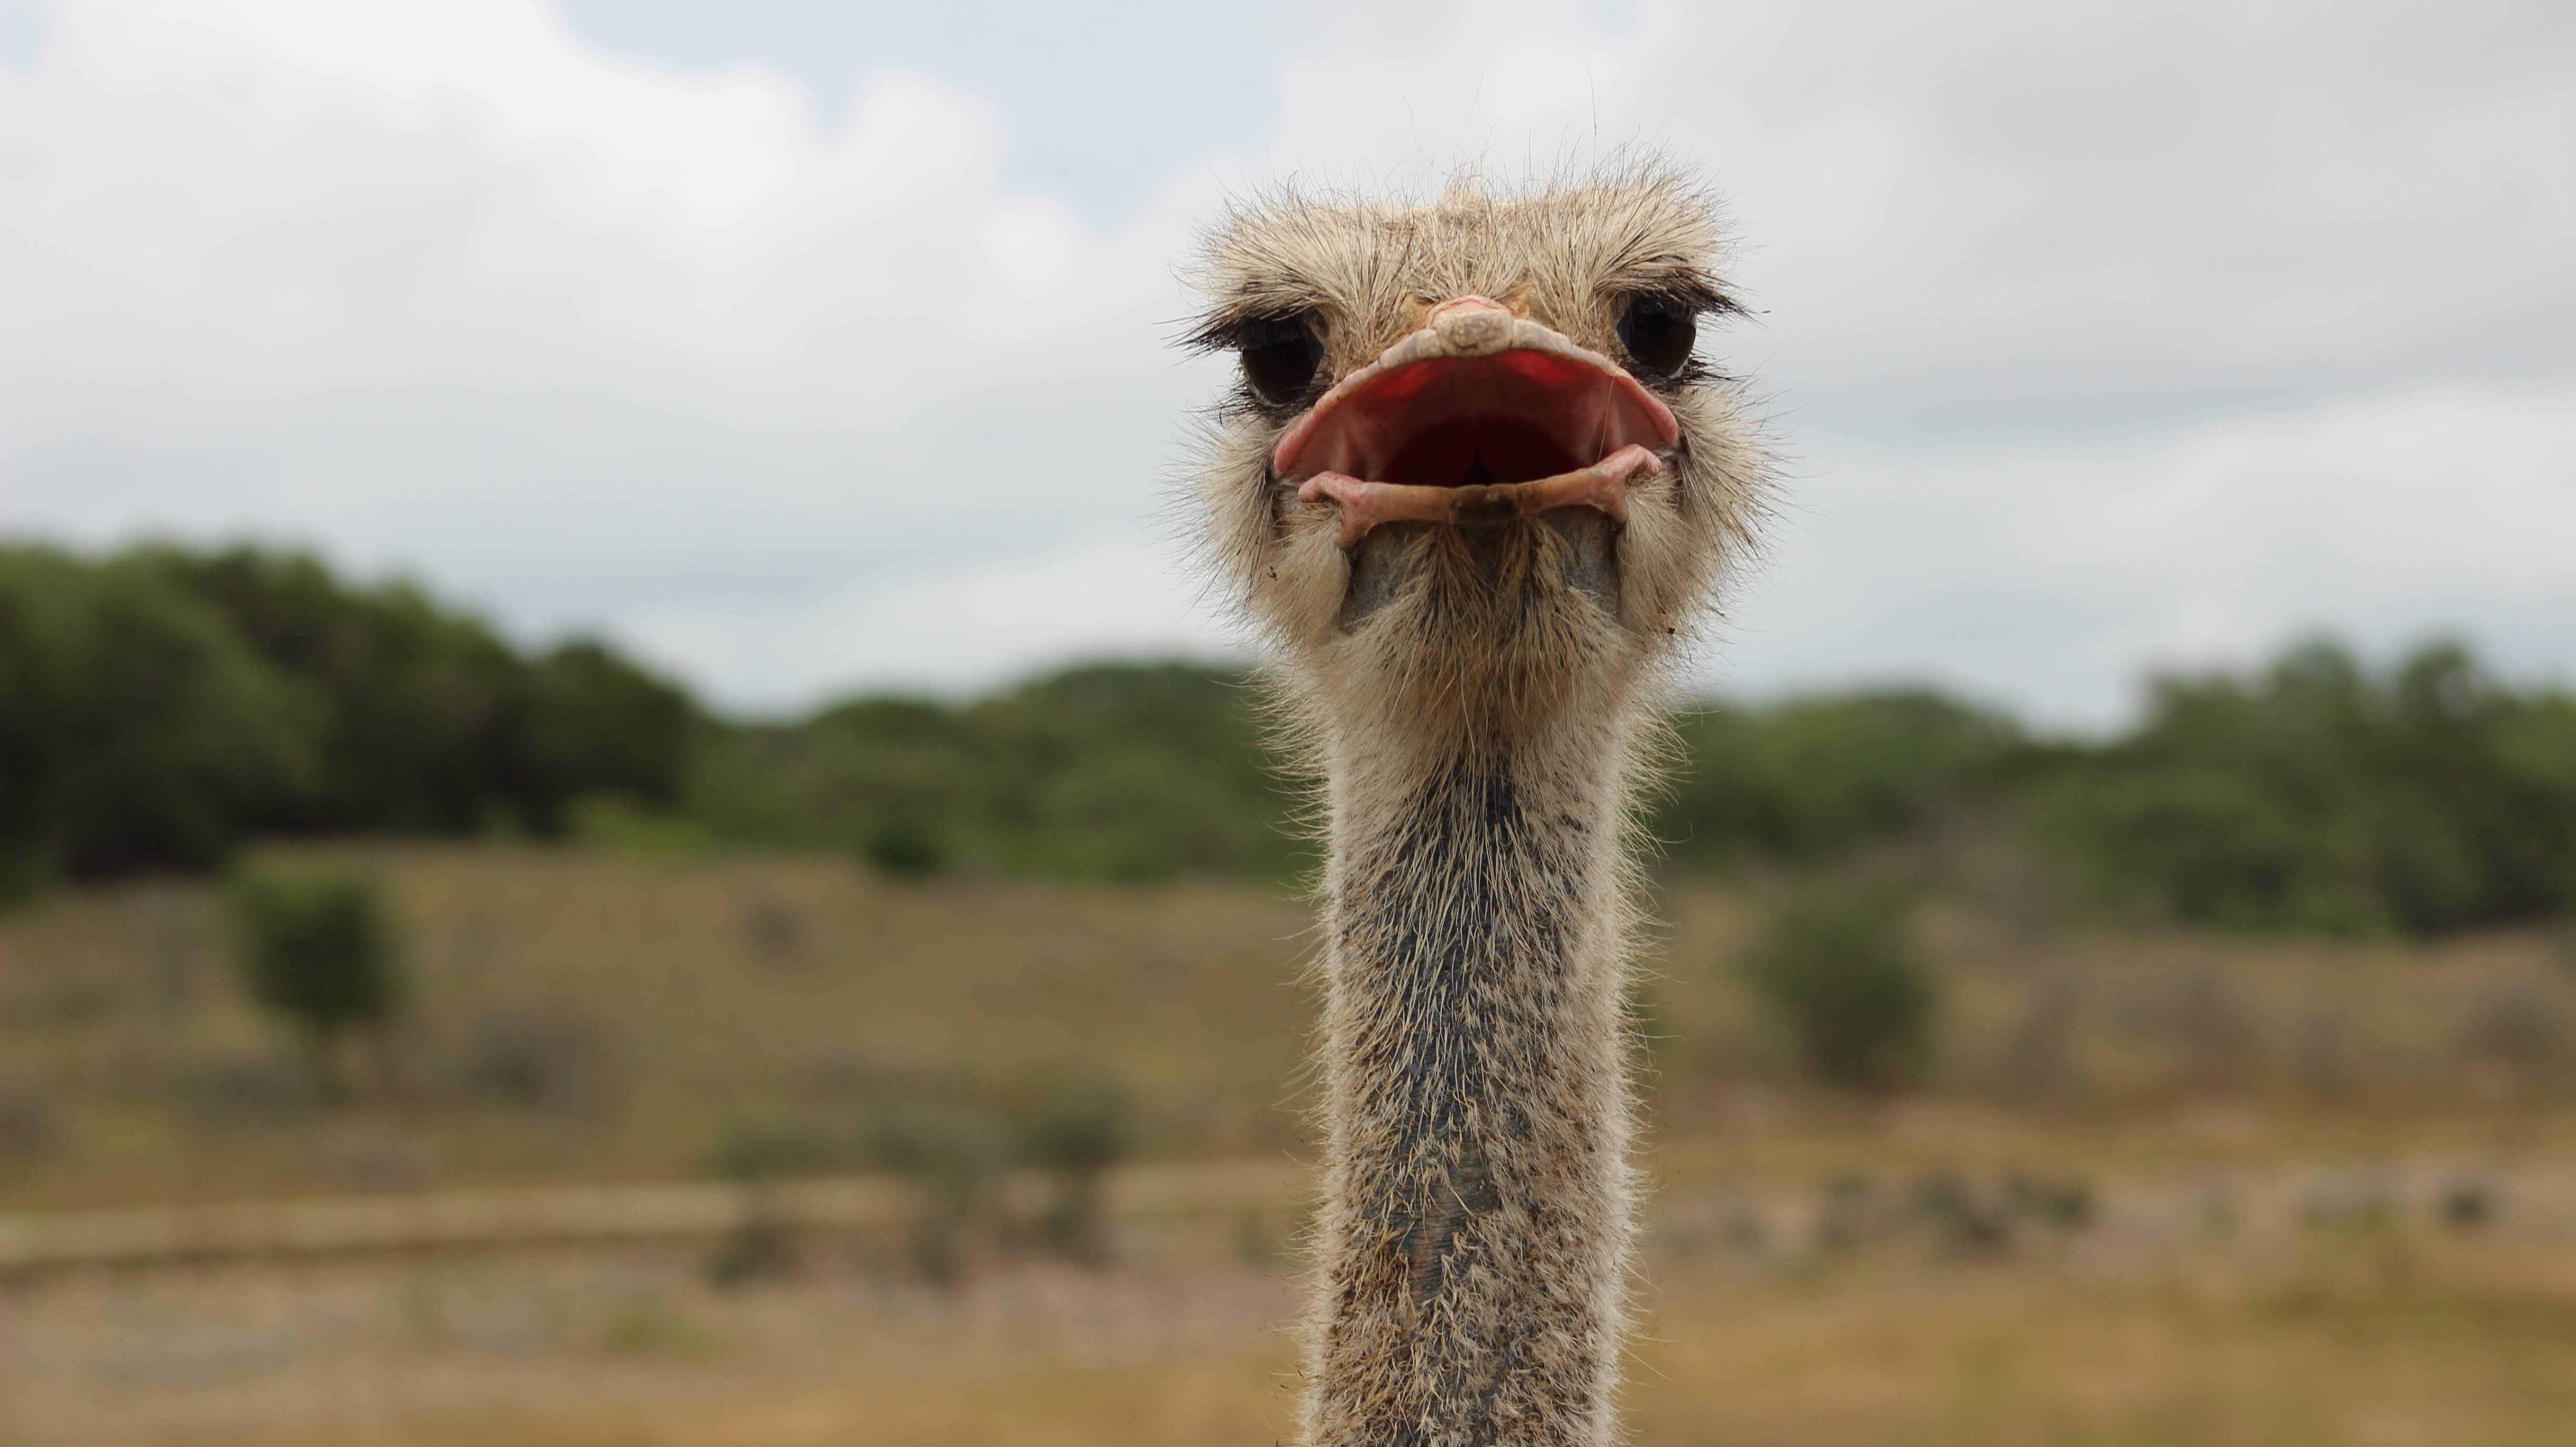 all about ostriches